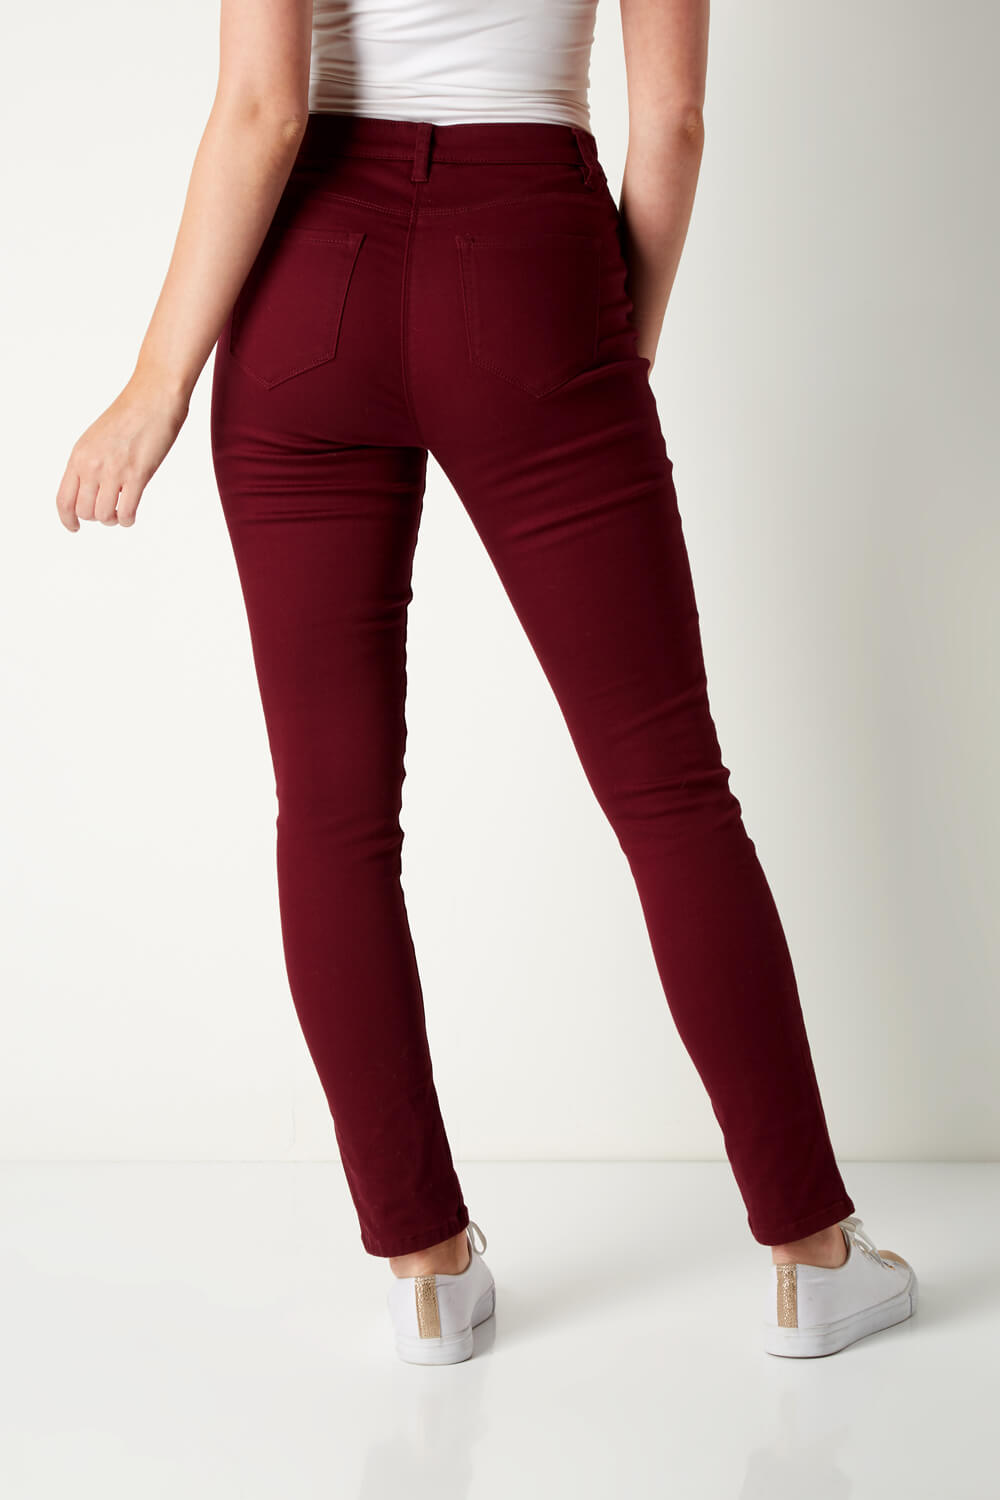 Berry Red Slim Fit Jeans , Image 2 of 4